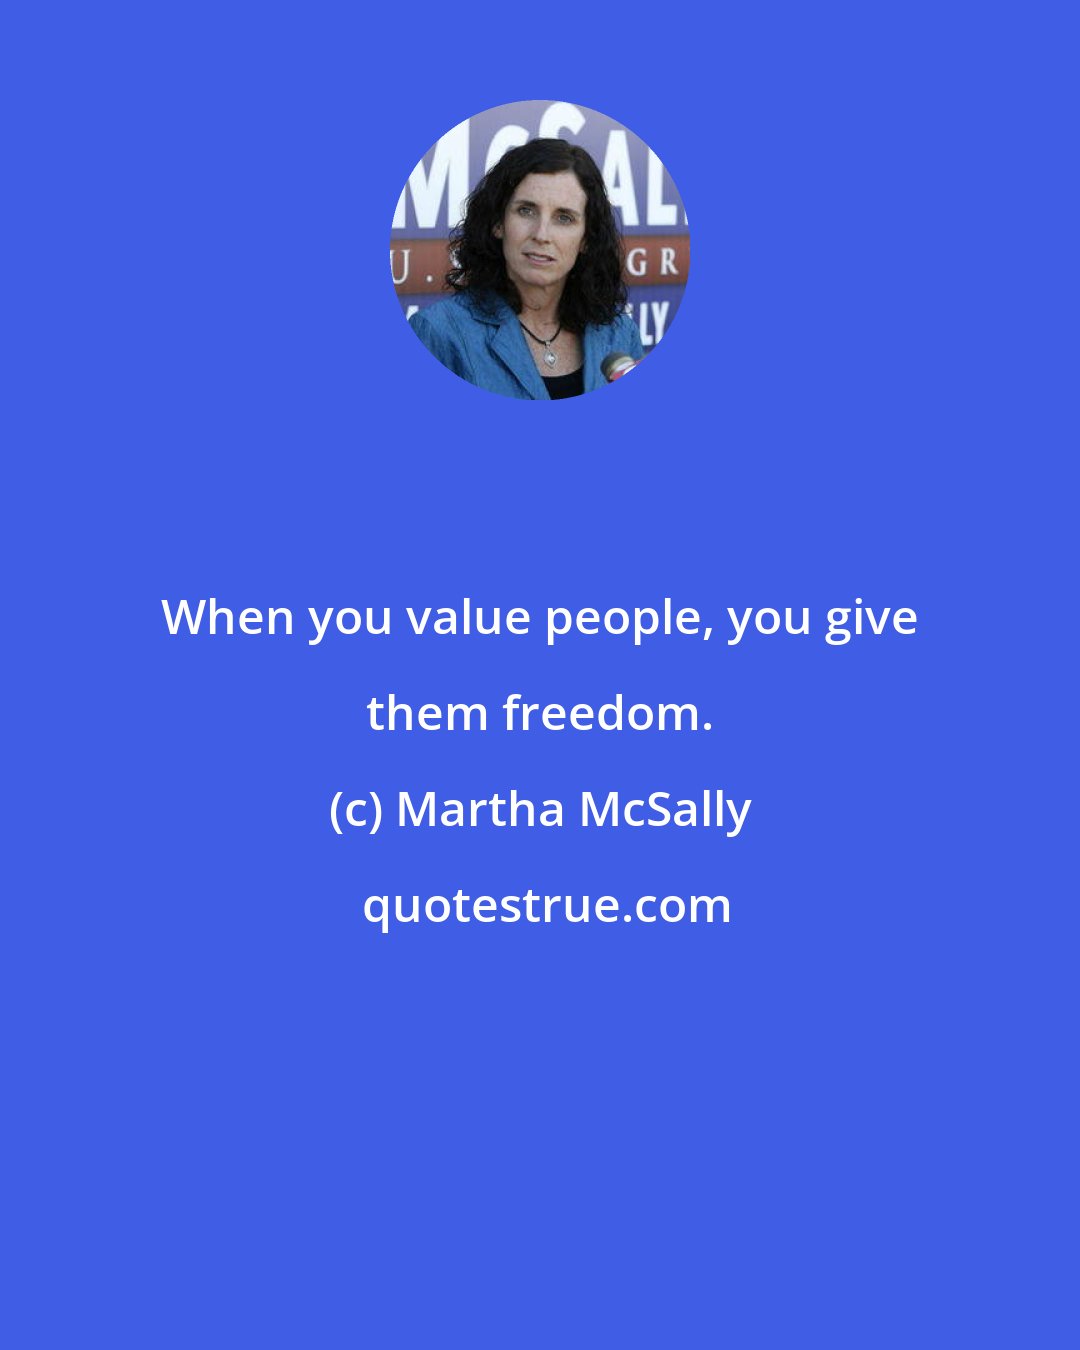 Martha McSally: When you value people, you give them freedom.